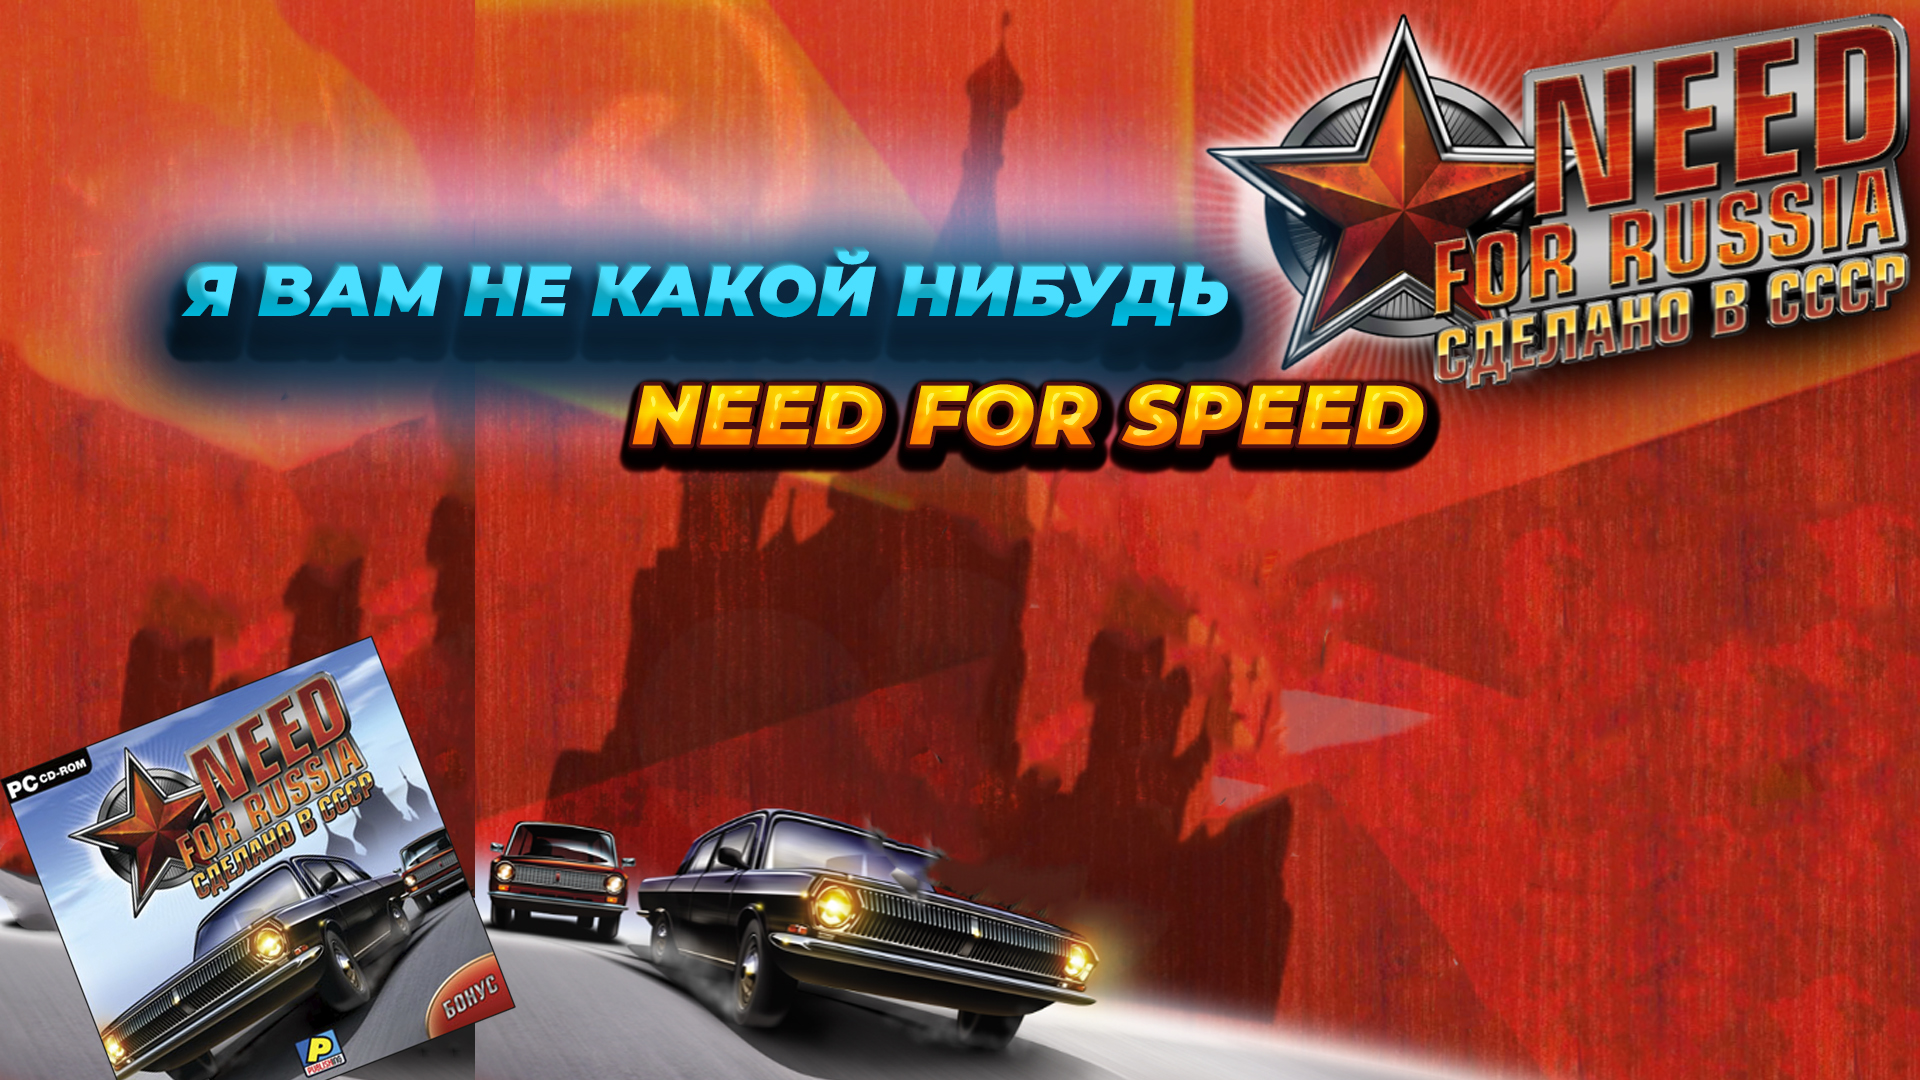 NEED FOR RUSSIA. Игры С Диска #14. Это вам не NEED FOR SPEED.